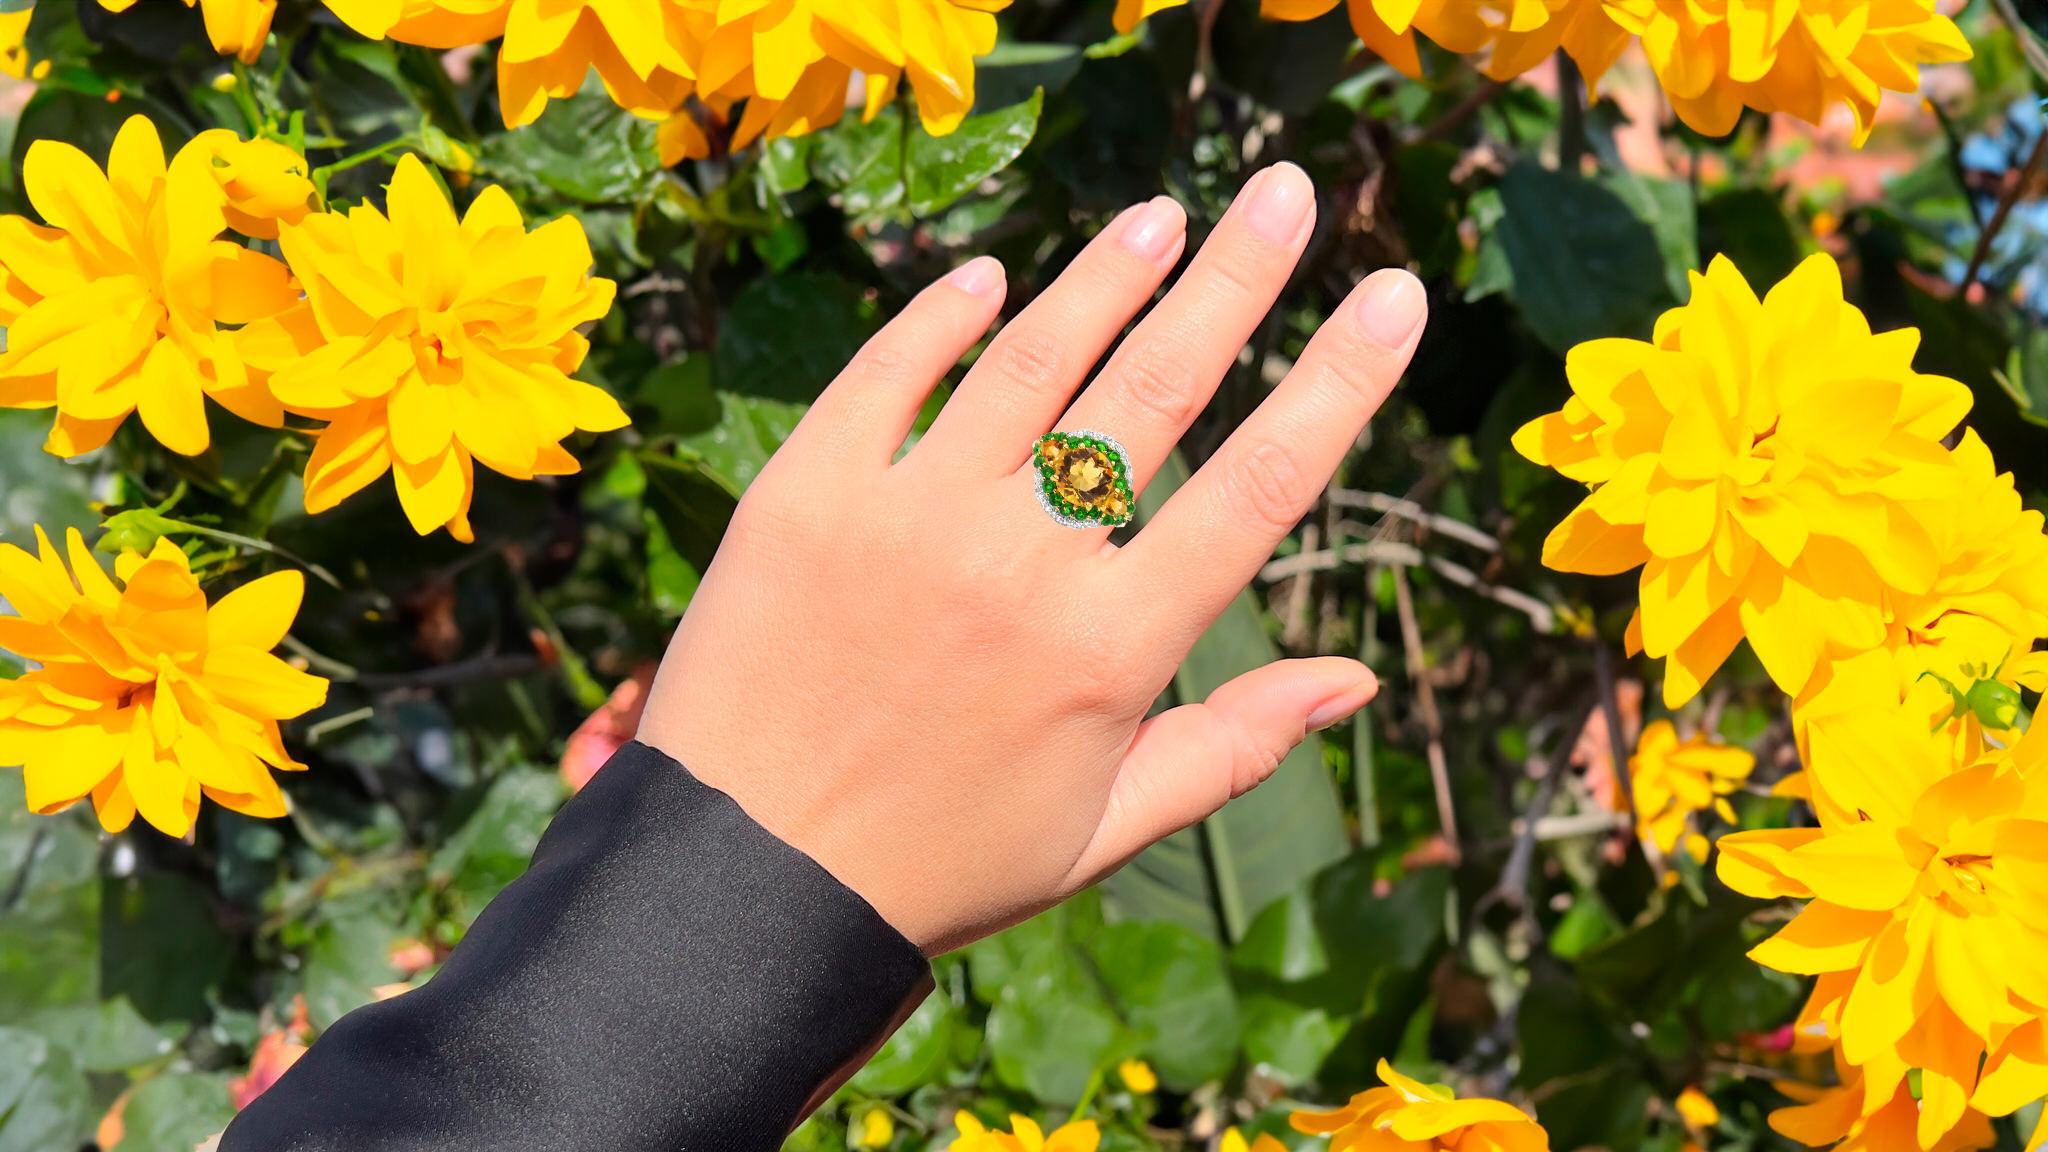 It comes with the Gemological Appraisal by GIA GG/AJP
All Gemstones are Natural
3 Citrines = 3.00 Carats
20 Chrome Diopsides = 0.80 Carats
26 White Topazes = 0.13 Carats
Metal: 14K Yellow Gold Plated Sterling Silver
Ring Size: 7* US
*It can be